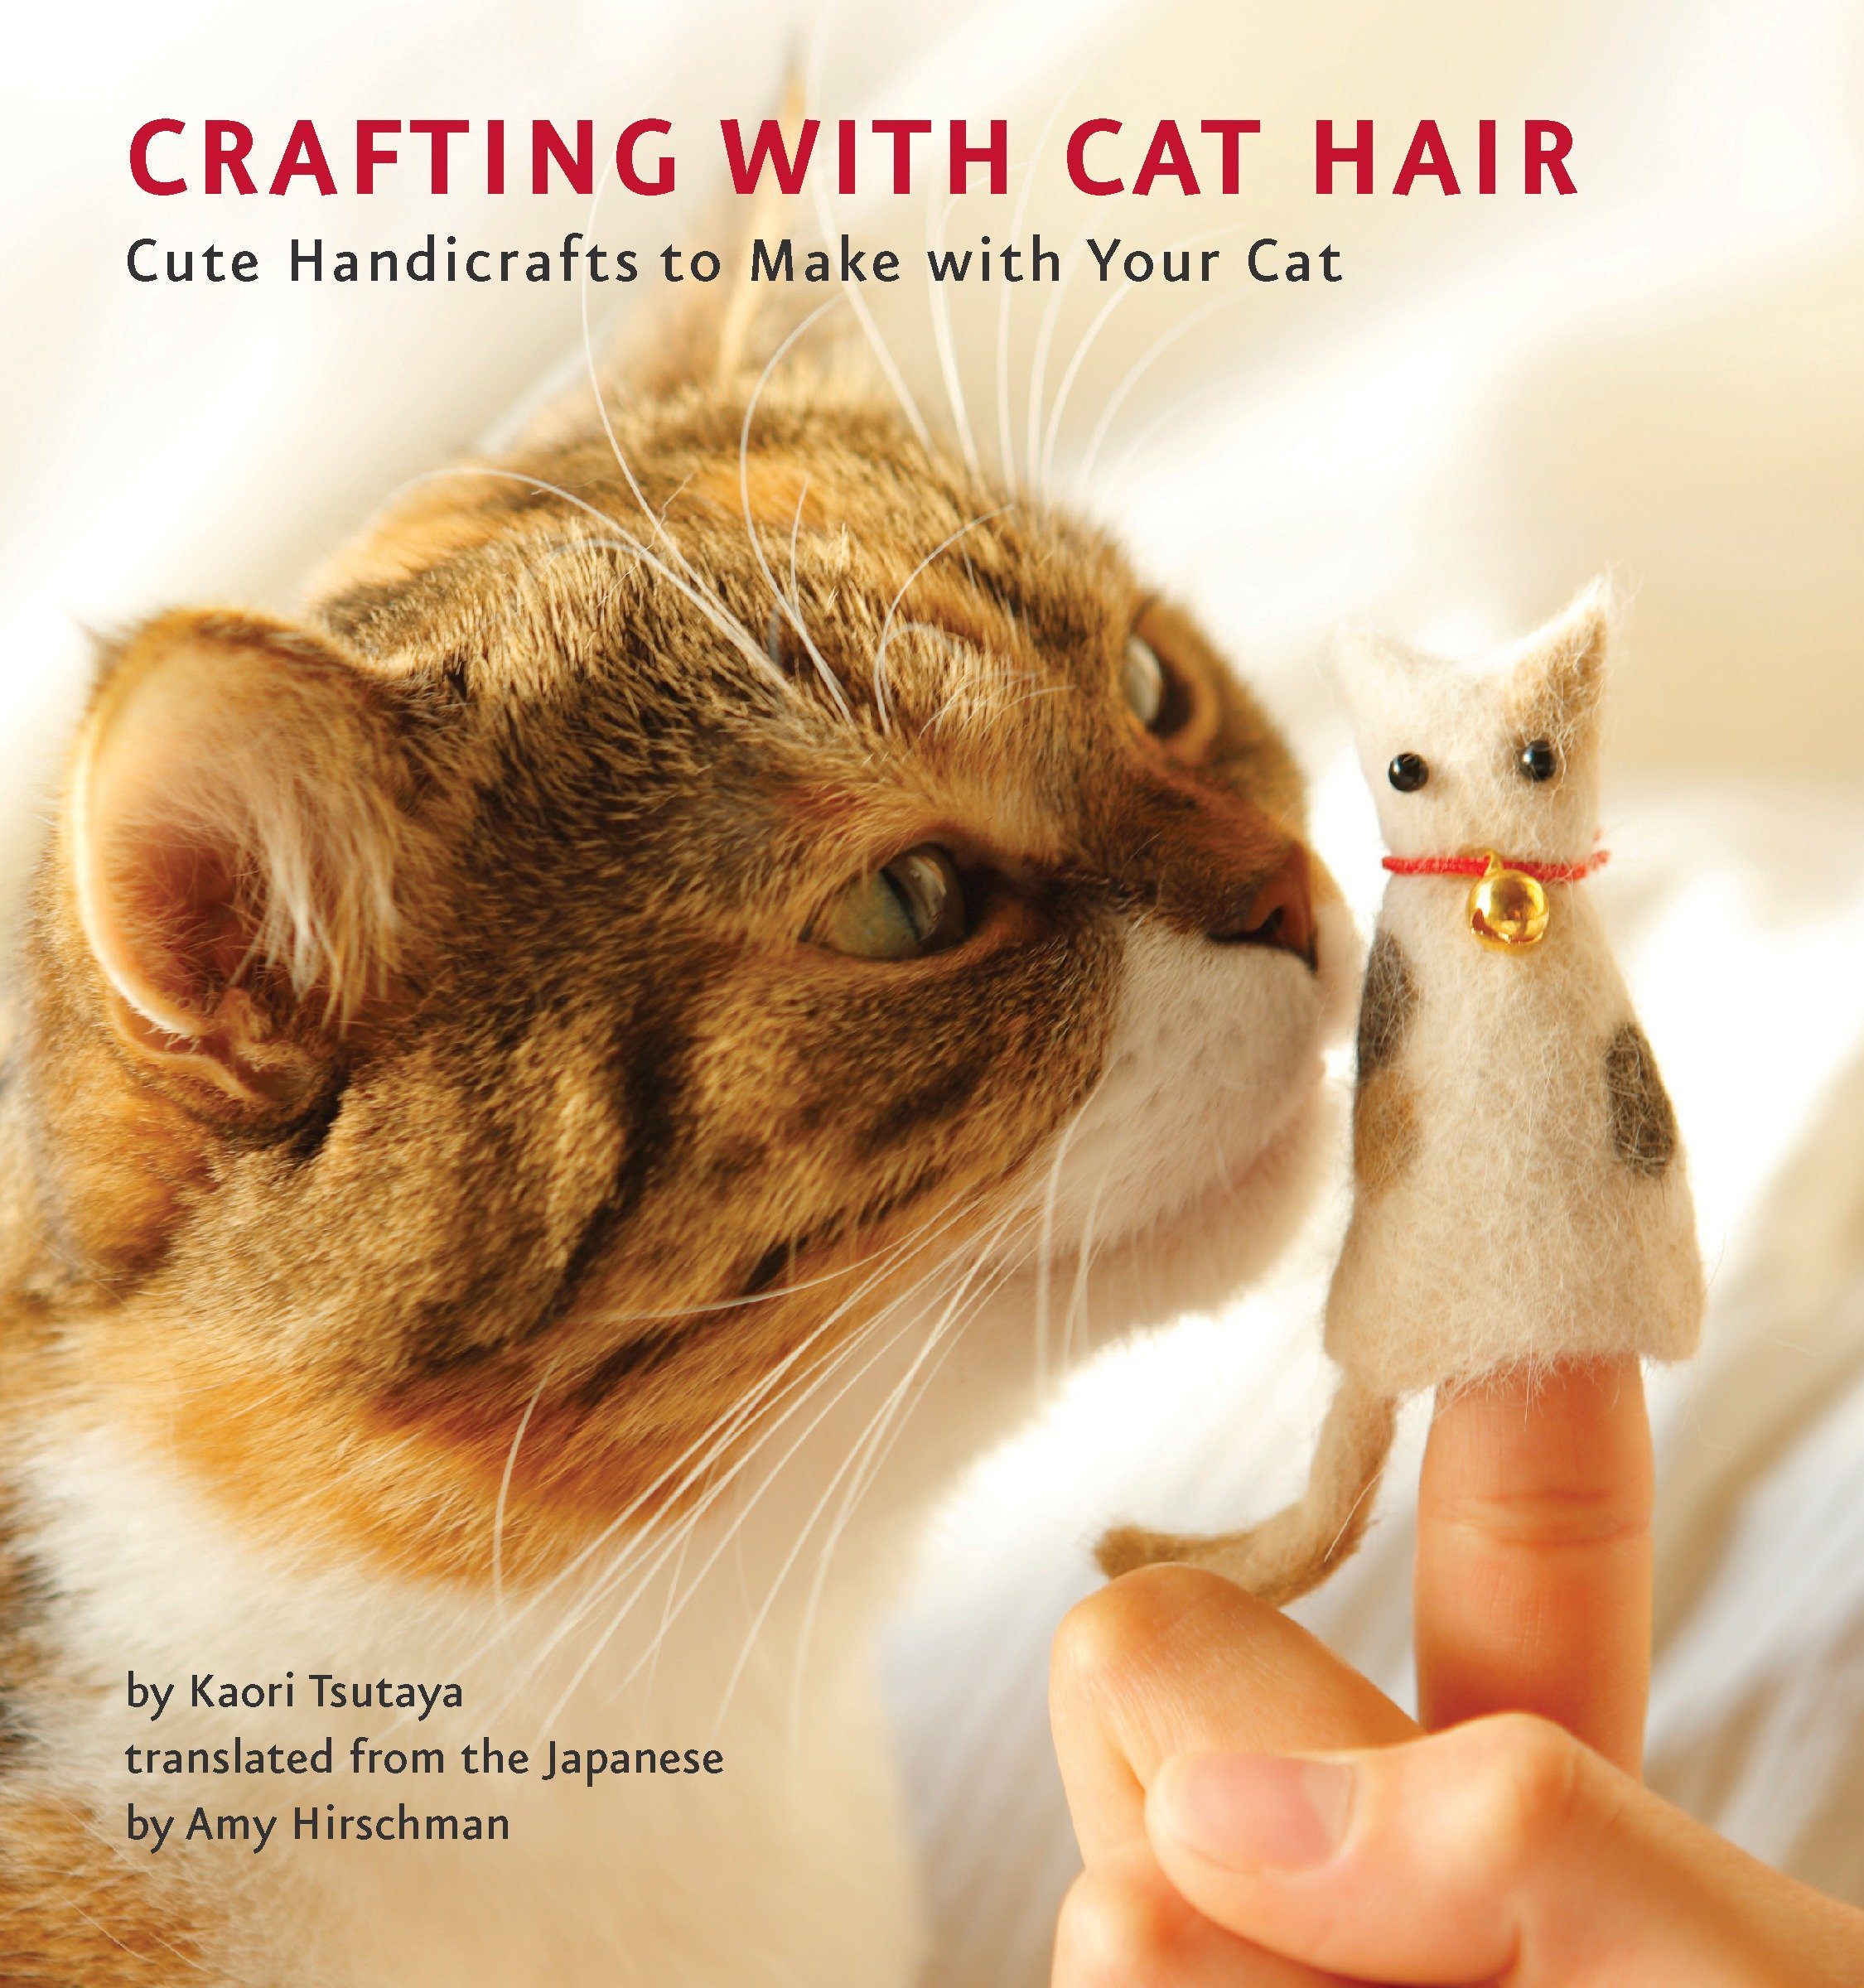 Cute Handicrafts to Make with Your Cat